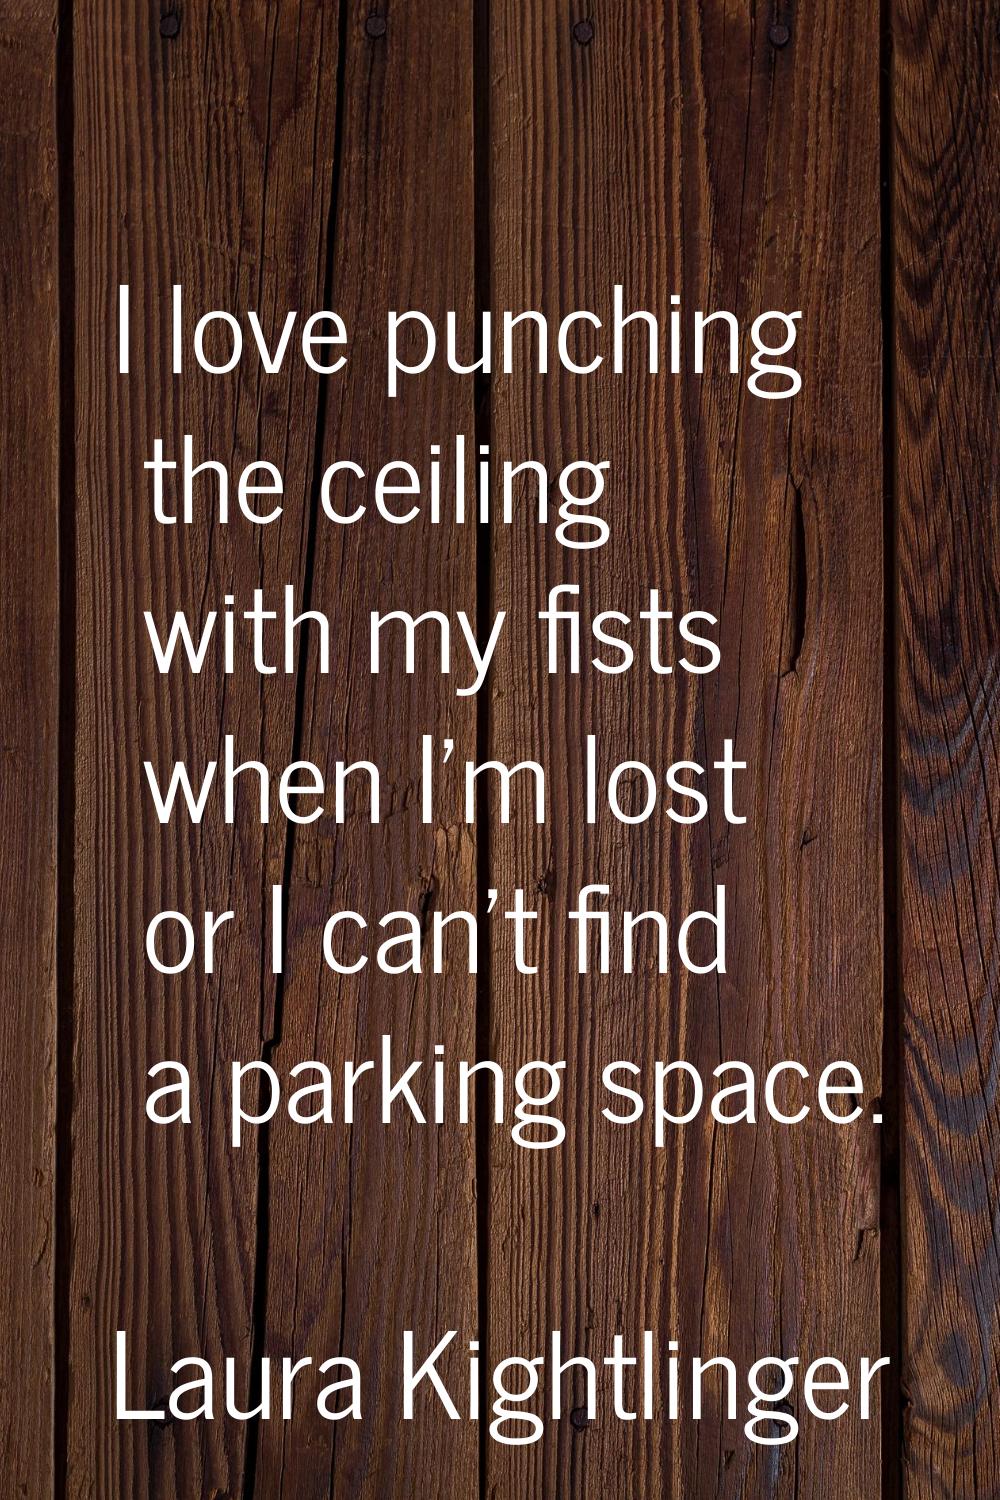 I love punching the ceiling with my fists when I'm lost or I can't find a parking space.